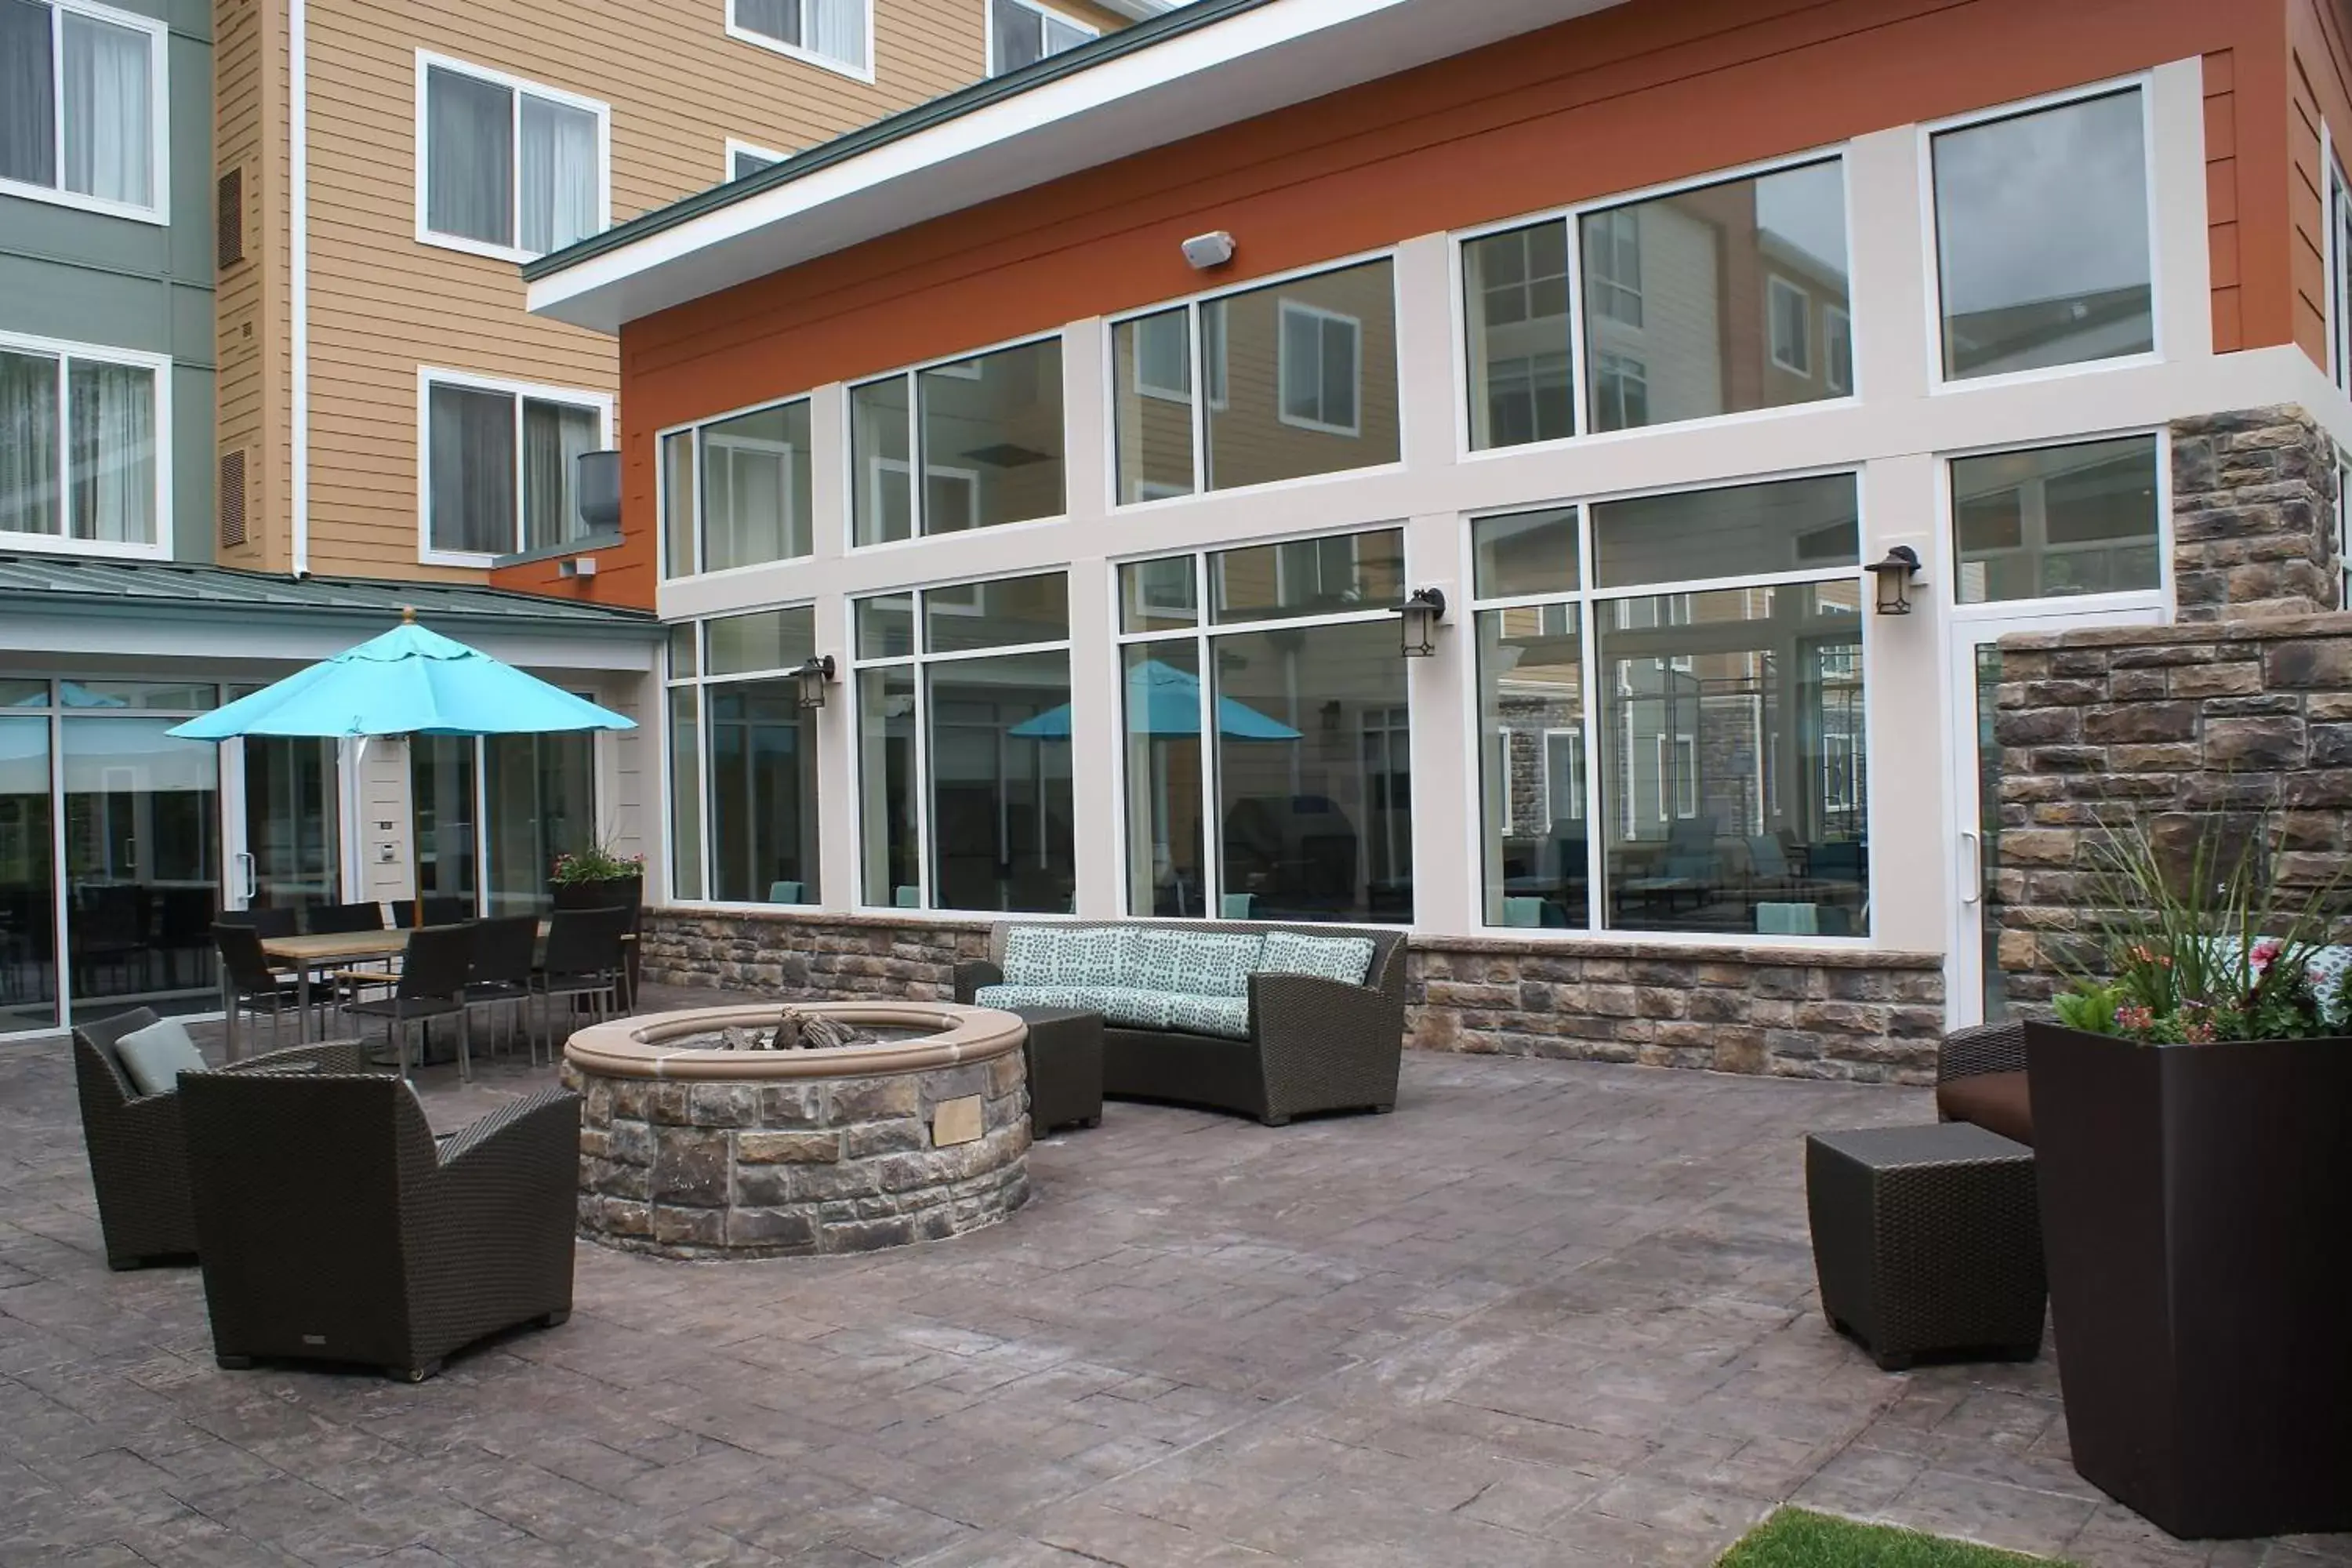 Property building in Residence Inn Pittsburgh Monroeville/Wilkins Township